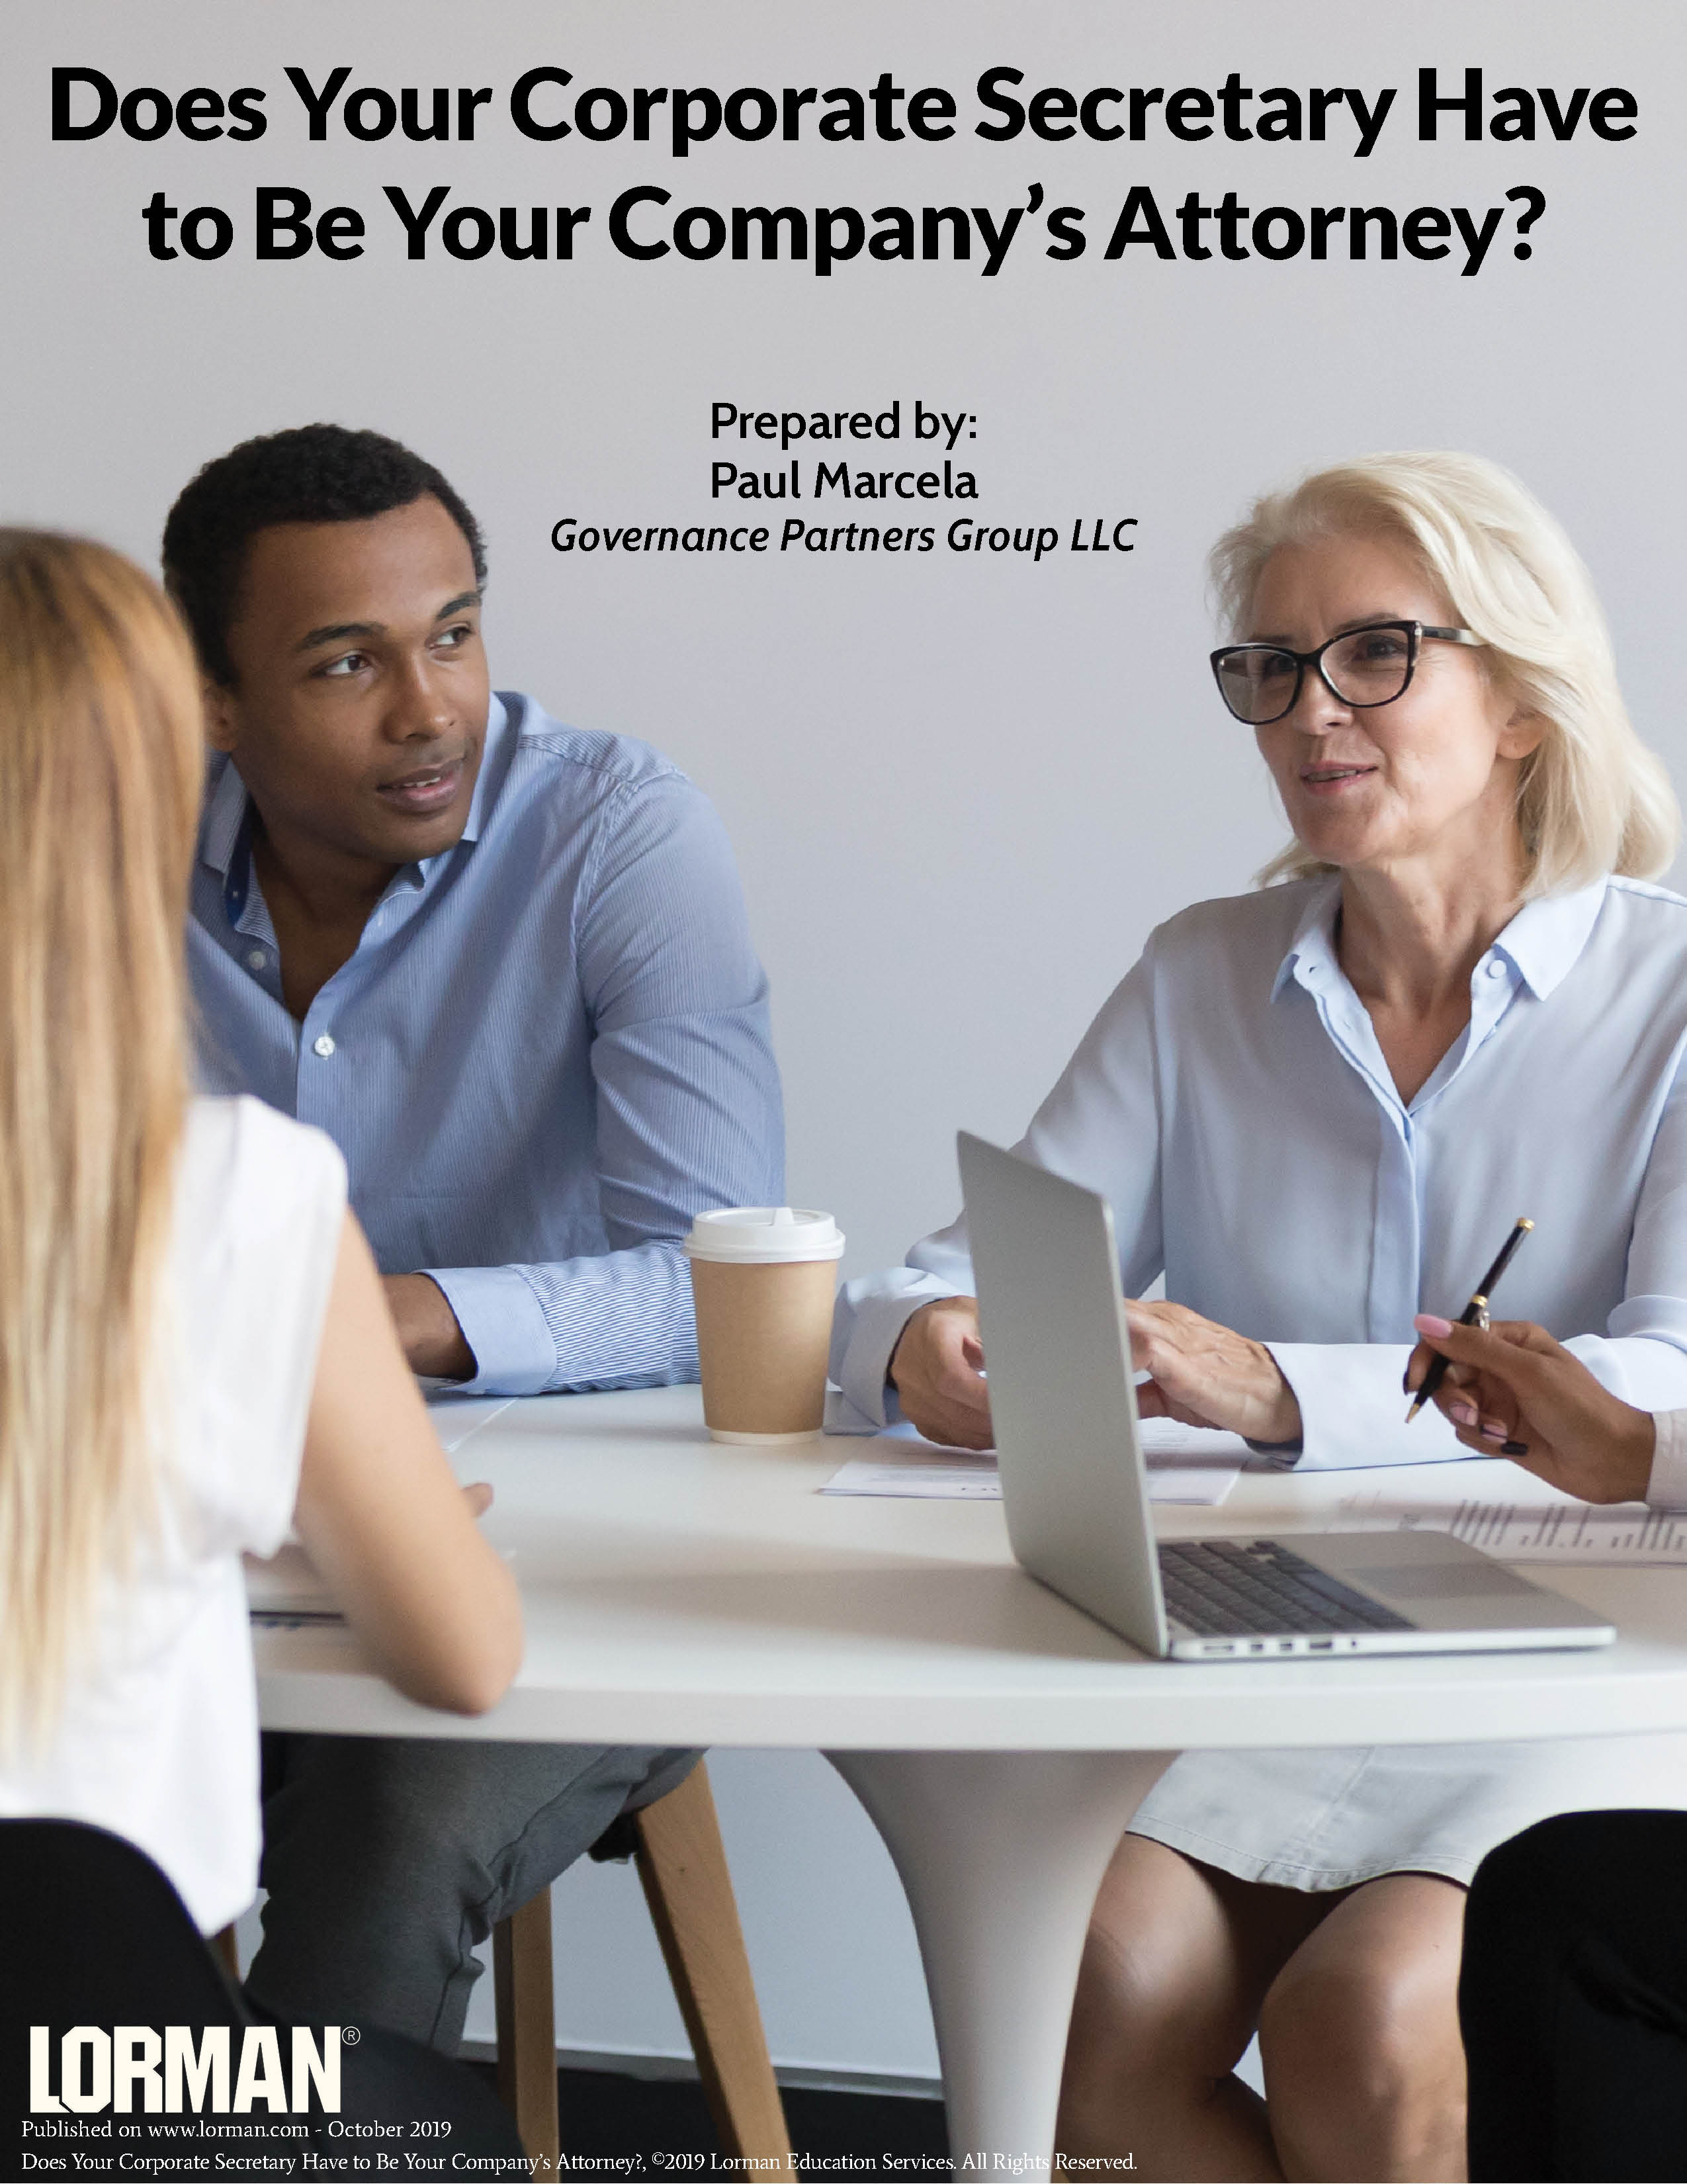 Does Your Corporate Secretary Have to Be Your Company’s Attorney?